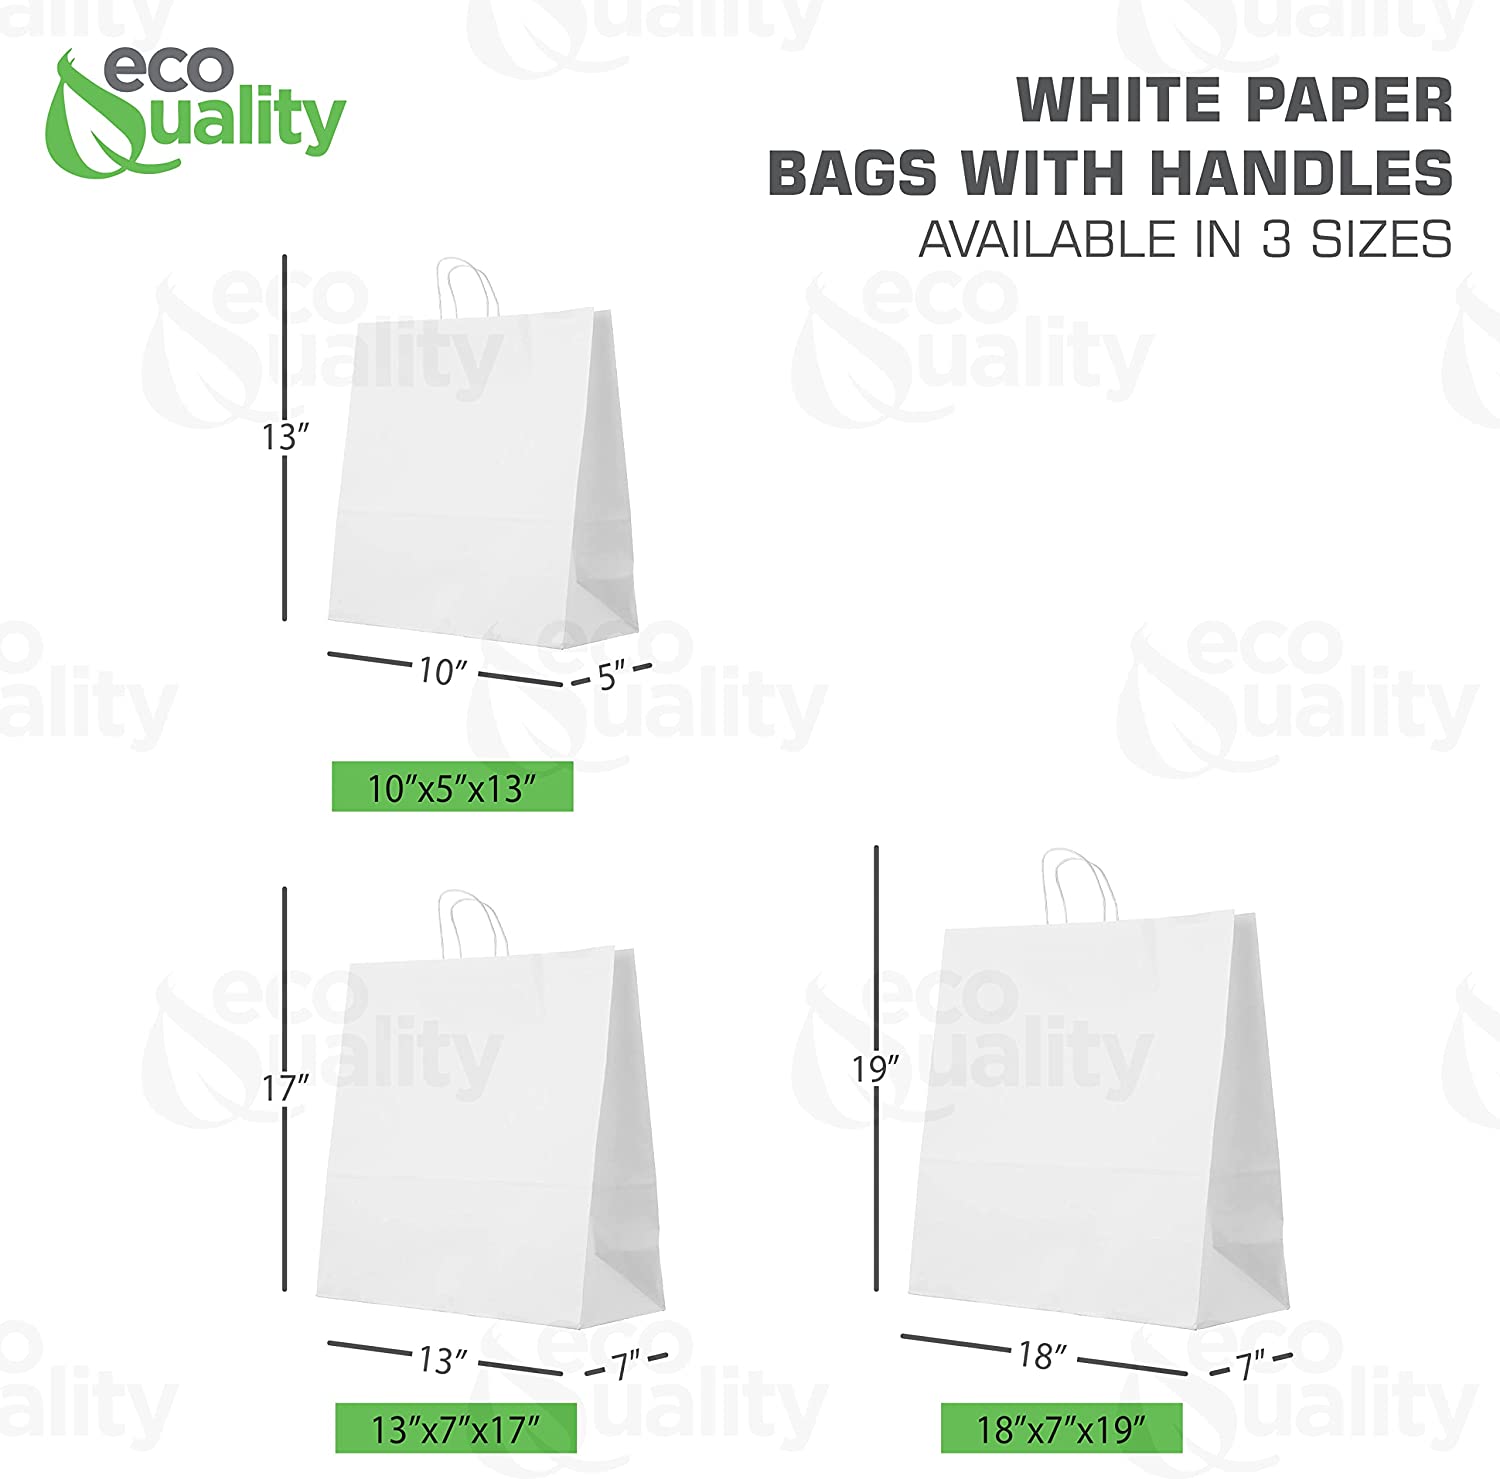 Reusable Recycled Material 20 Pounds White Gift Bag DYI Paper Bag Heavy Duty Strong Paper Bag Supermarket paper bags carry out bags Paper Bags with handles Paper Take Out Grocery Bags White Kraft Bags Ecofriendly Paper Bag Retail Merchandise bag white Paper Shopping Bags takeout bag Paper Bag Disposable medium 13x7x17 inches strong